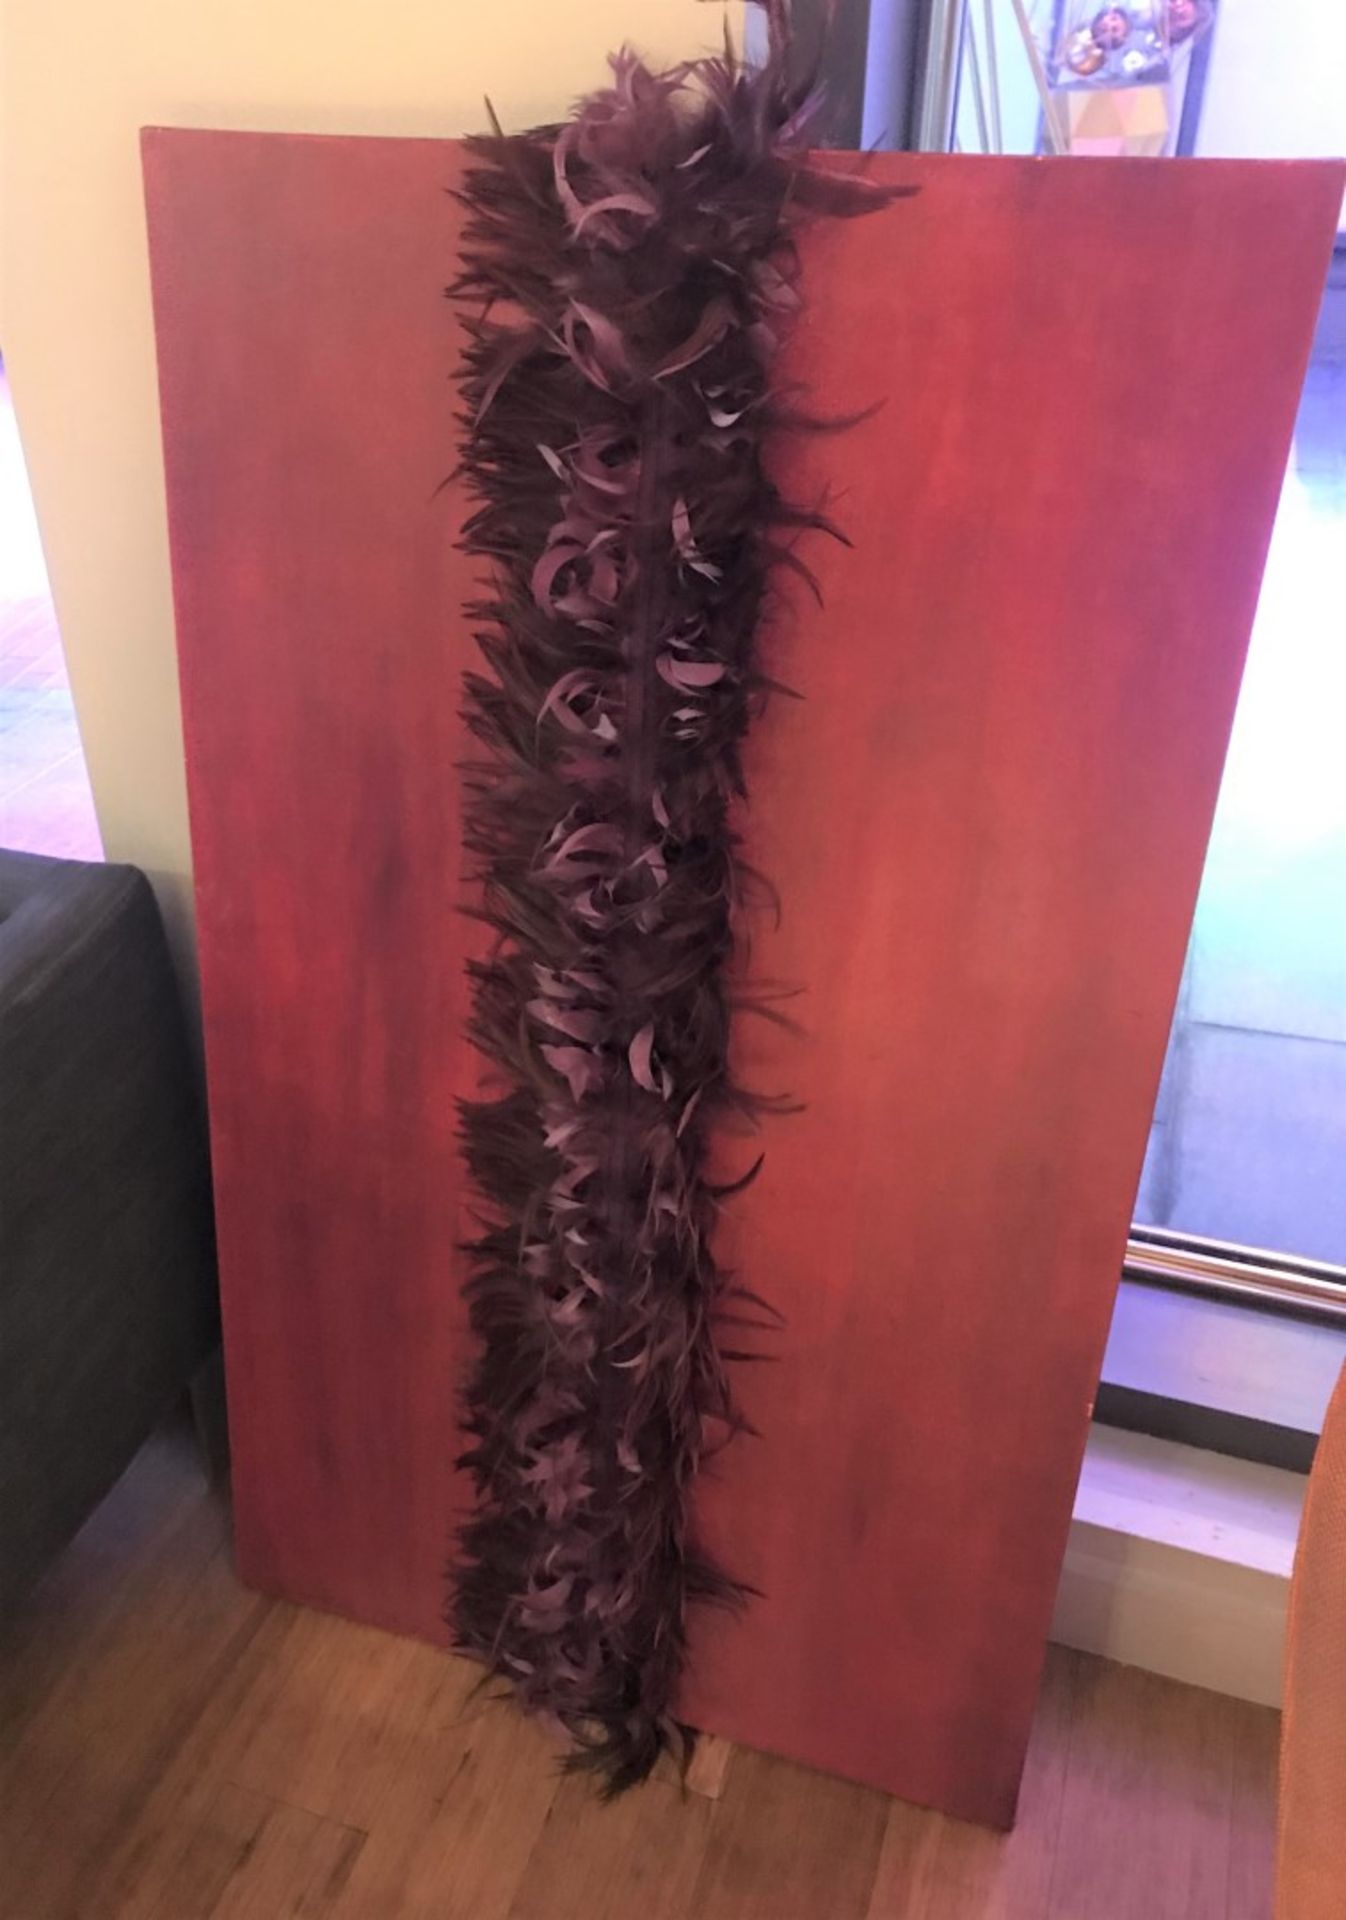 1 x Large Canvas Wall Art Picture With Faux Feather Central Boa - CL587 - Location: Altrincham WA14